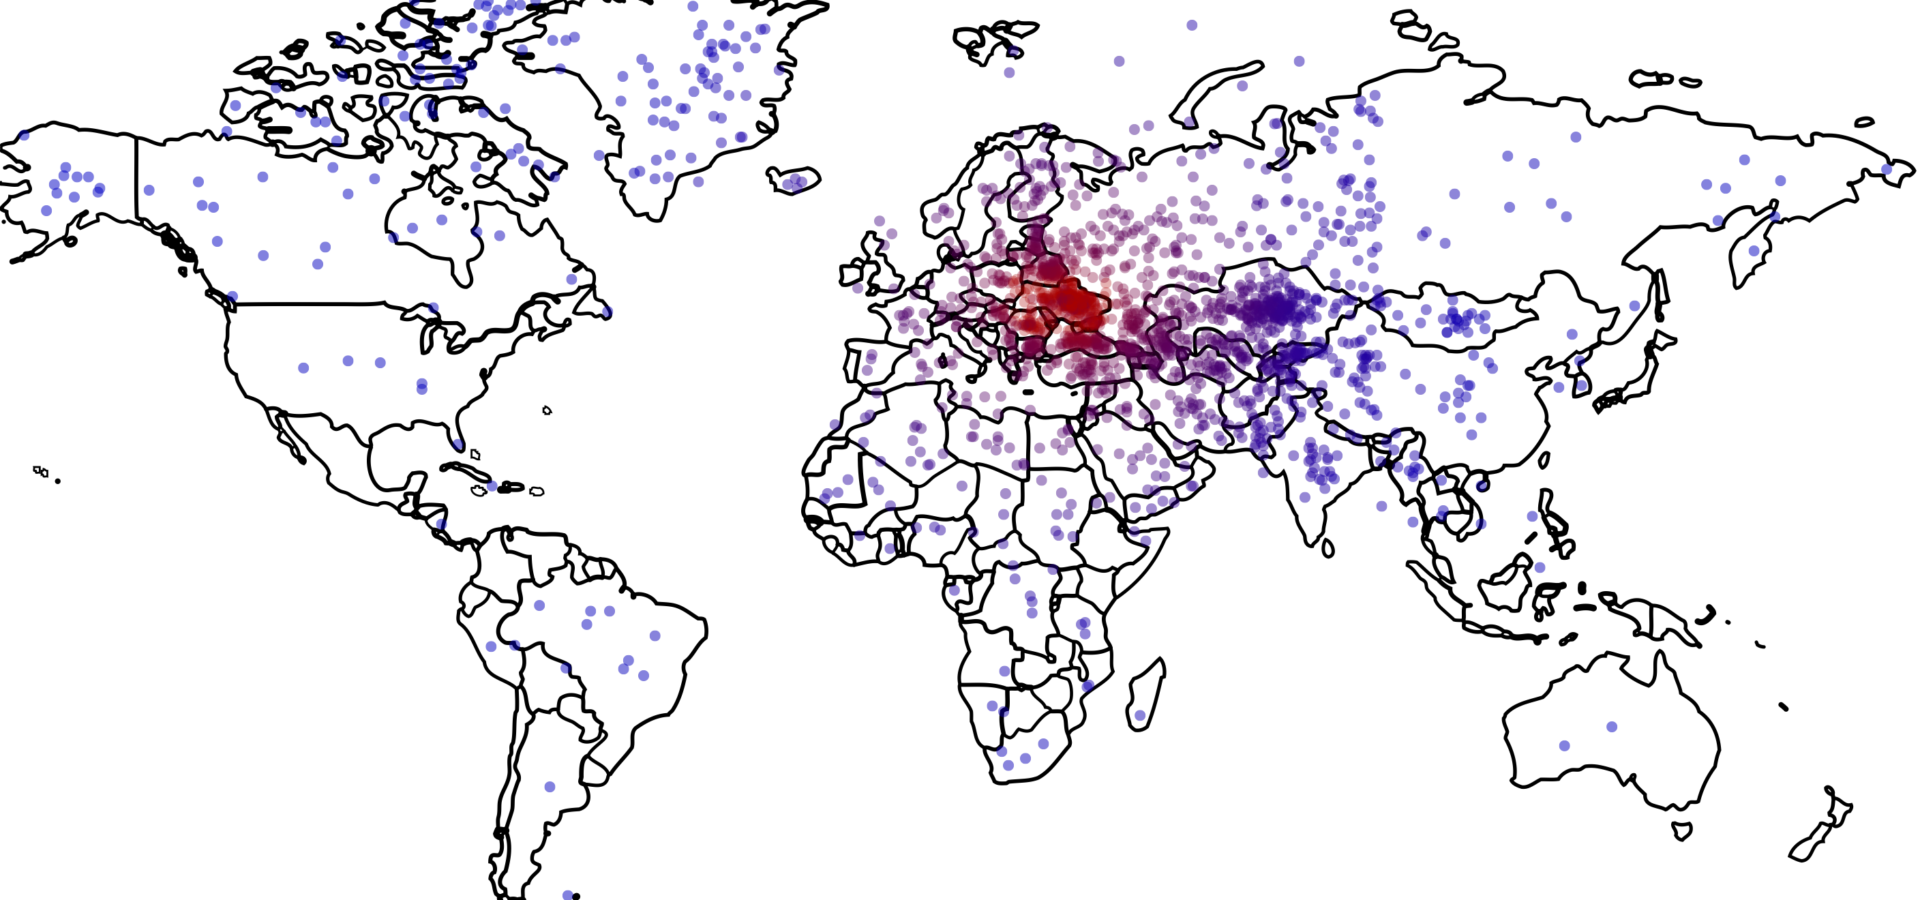 Where’s Ukraine? Each dot depicts the location where a U.S. survey respondent situated Ukraine; the dots are colored based on how far removed they are from the actual country, with the most accurate responses in red and the least accurate ones in blue. (Data: Survey Sampling International; Figure: Thomas Zeitzoff/The Monkey Cage)